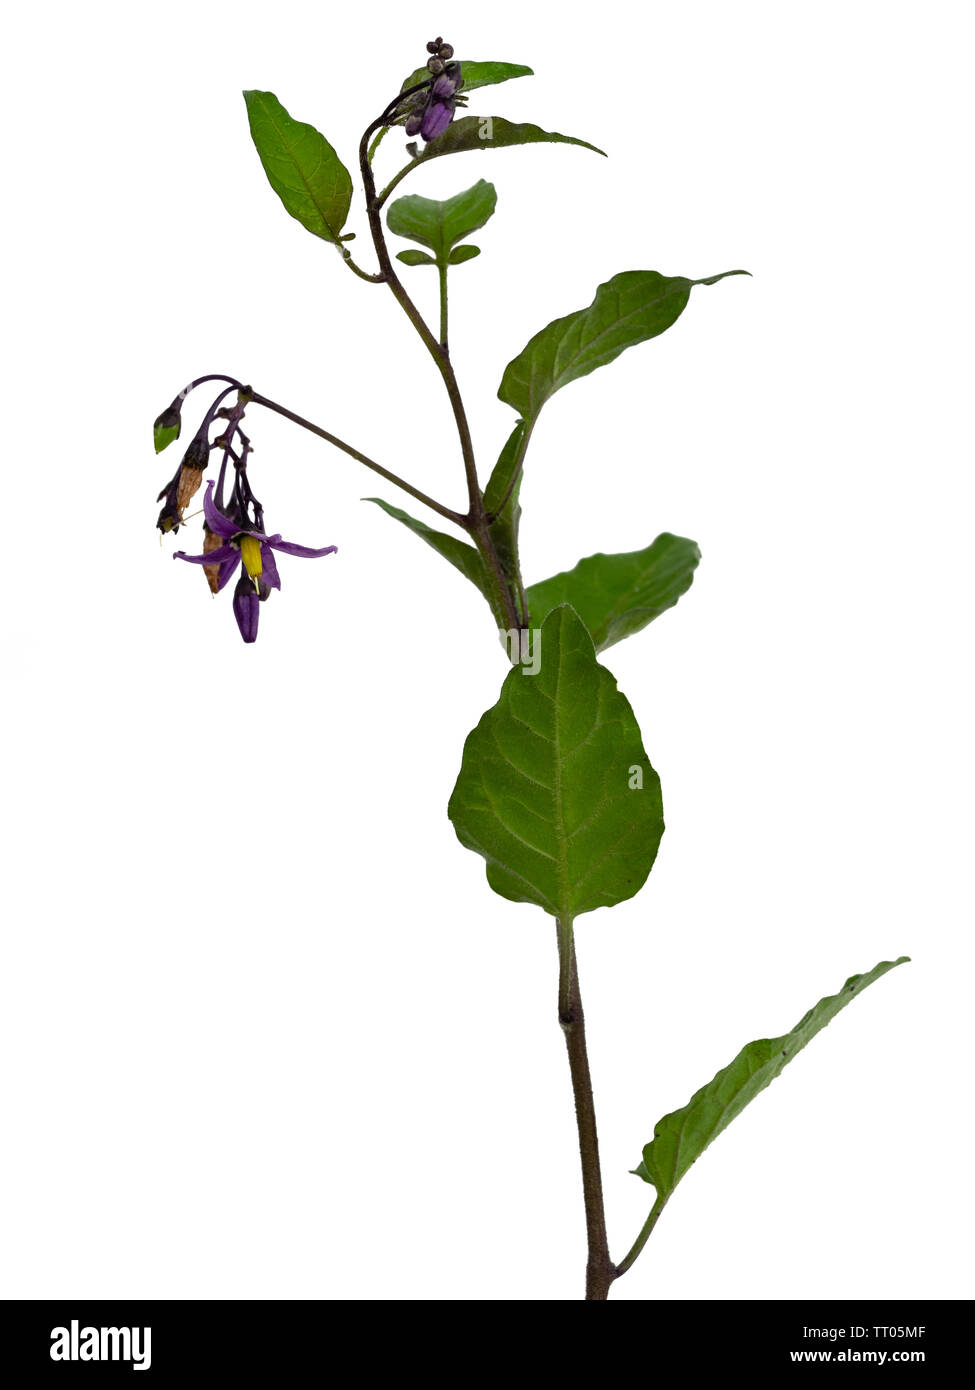 Annual foliage and purple flowers of Solanum dulcamara, woody nightshade, a toxic herbaceous perennial scrambler on a white background Stock Photo